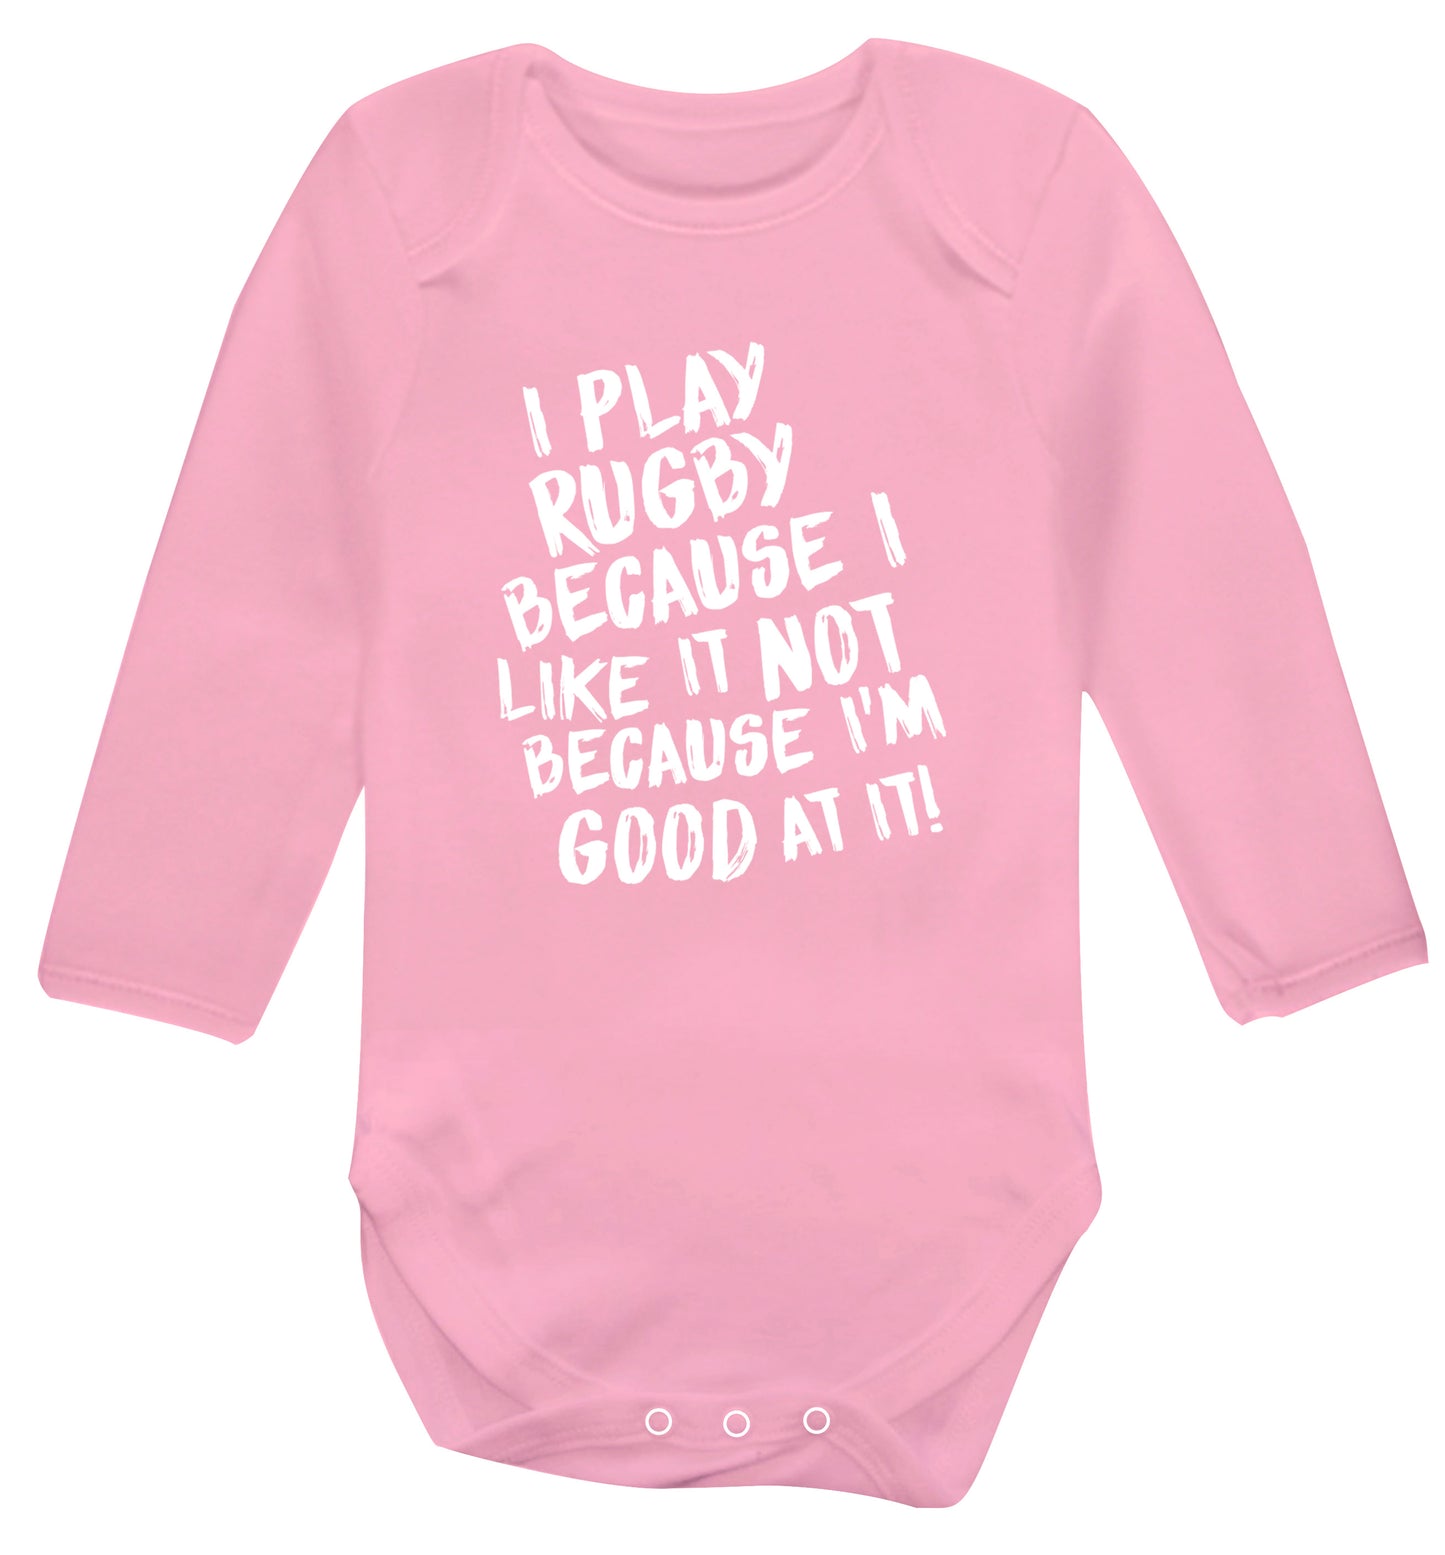 I play rugby because I like it not because I'm good at it Baby Vest long sleeved pale pink 6-12 months